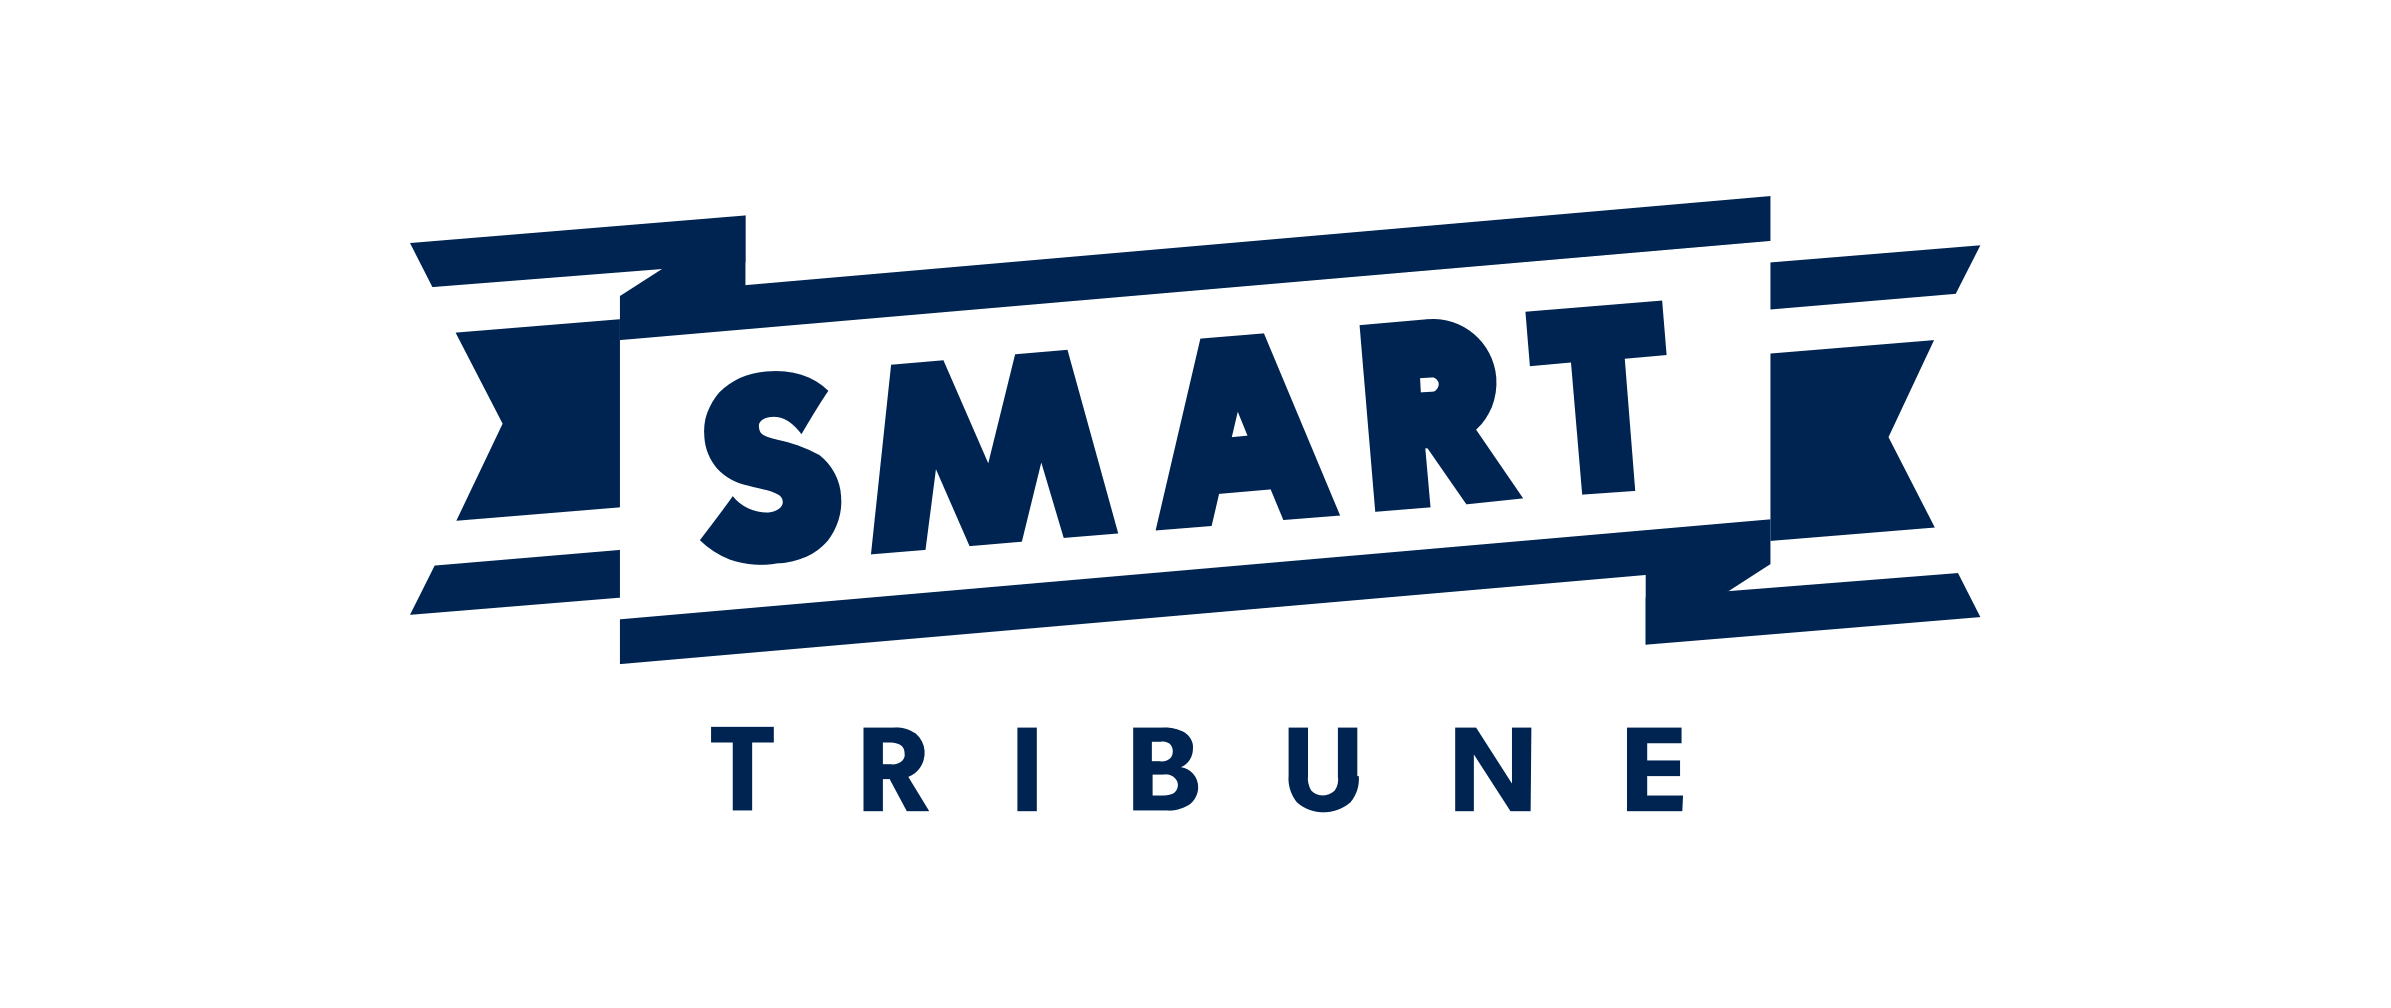 Review Smart Tribune: Enhance Customer Experience with Advanced Helpdesk Solutions - Appvizer